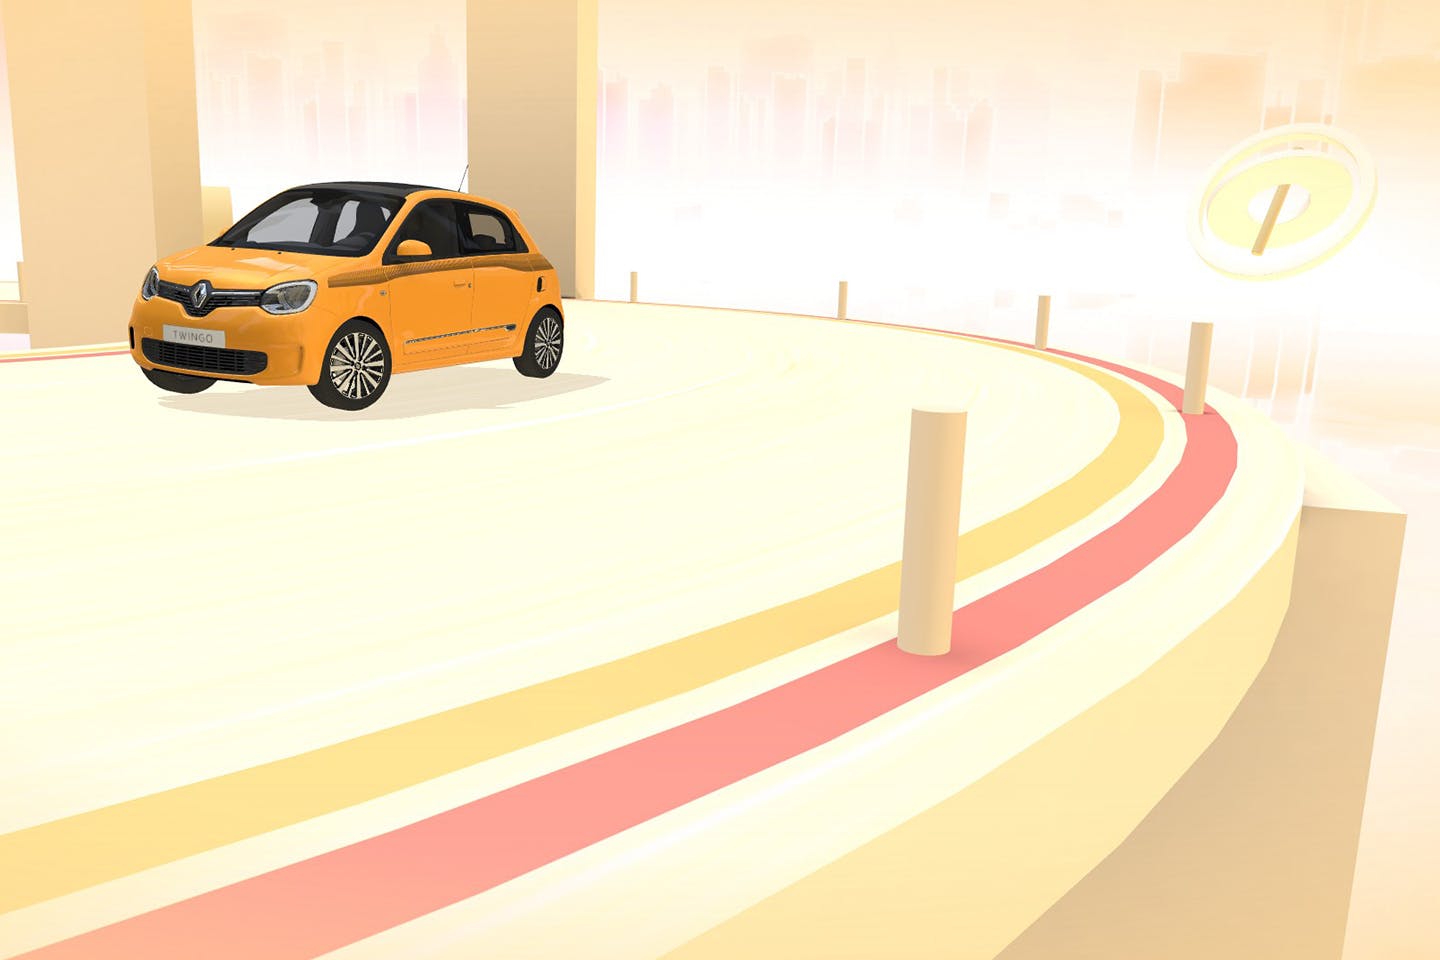 Orange Renault Twingo driving, view from the side